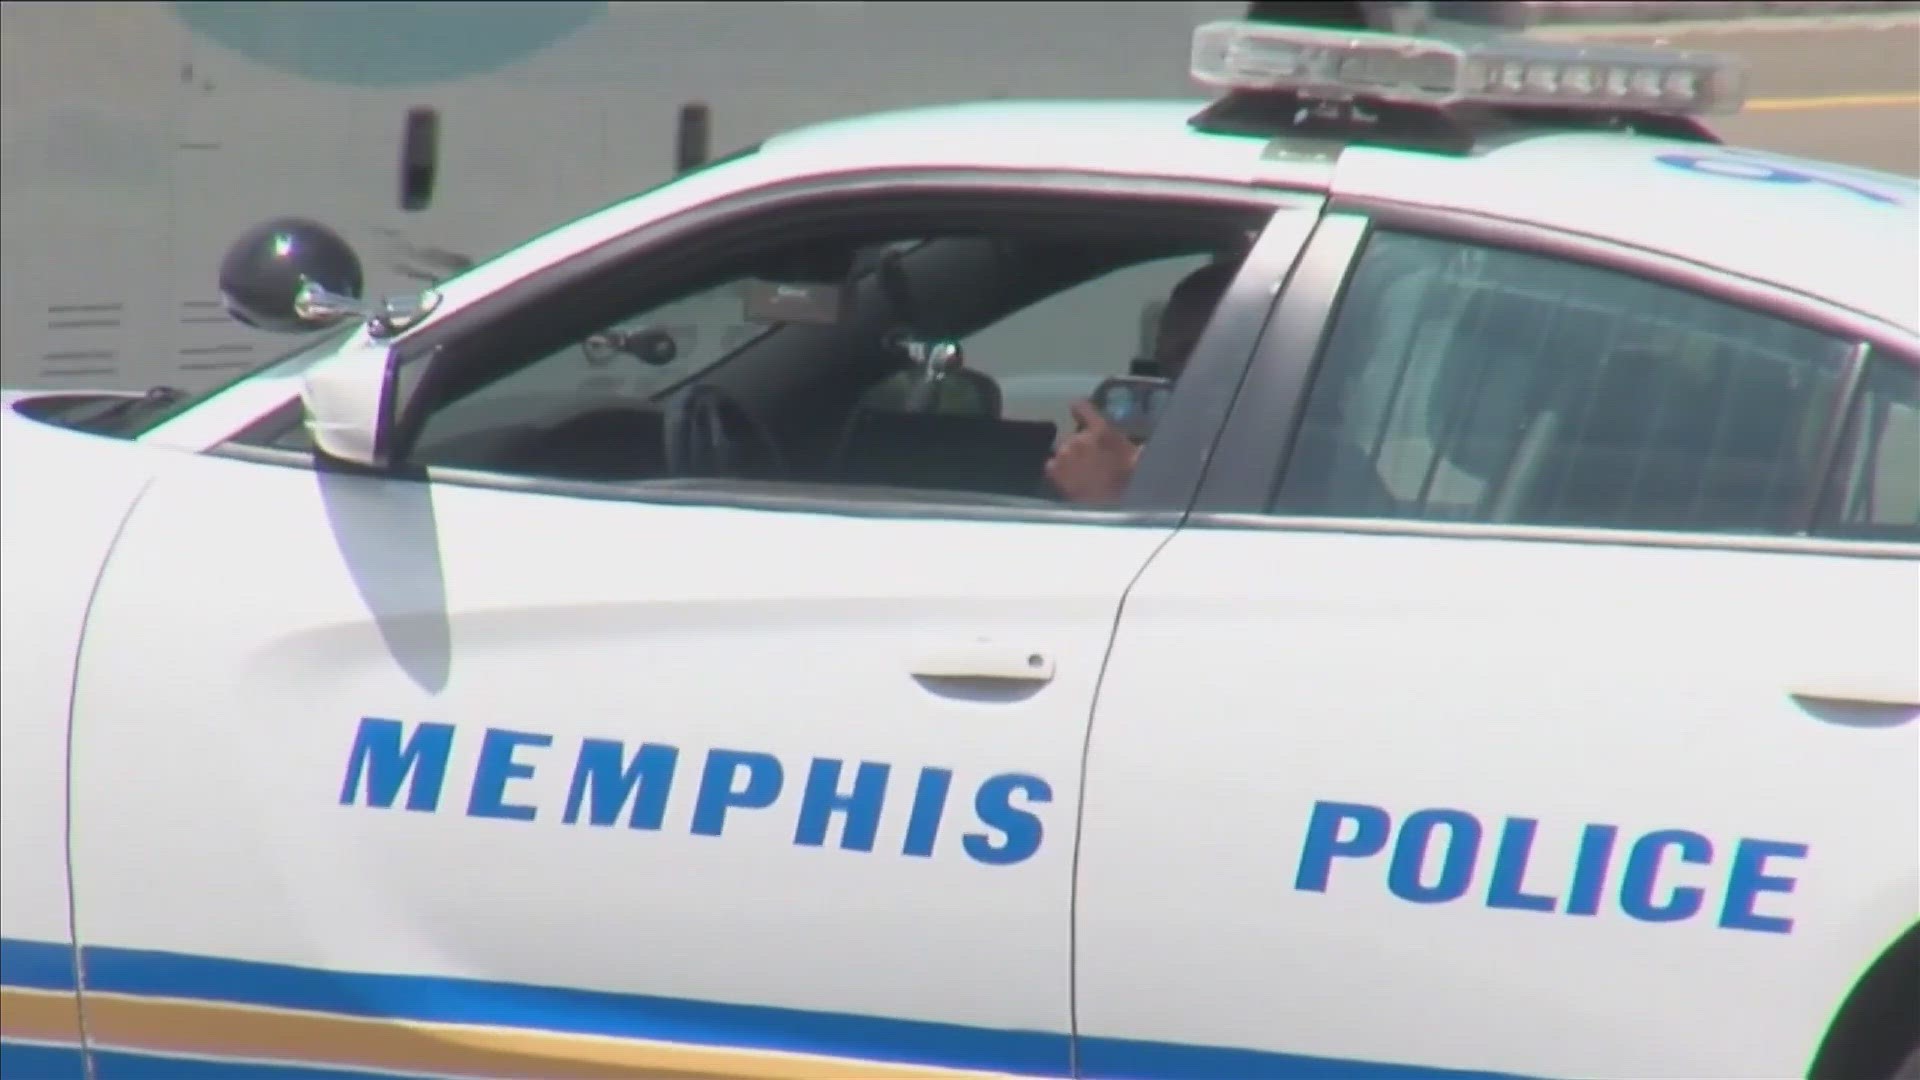 Memphis police issued a traffic alert on Sunday at New Allen and Frayser Boulevard after they said a two-car crash took place in the area.